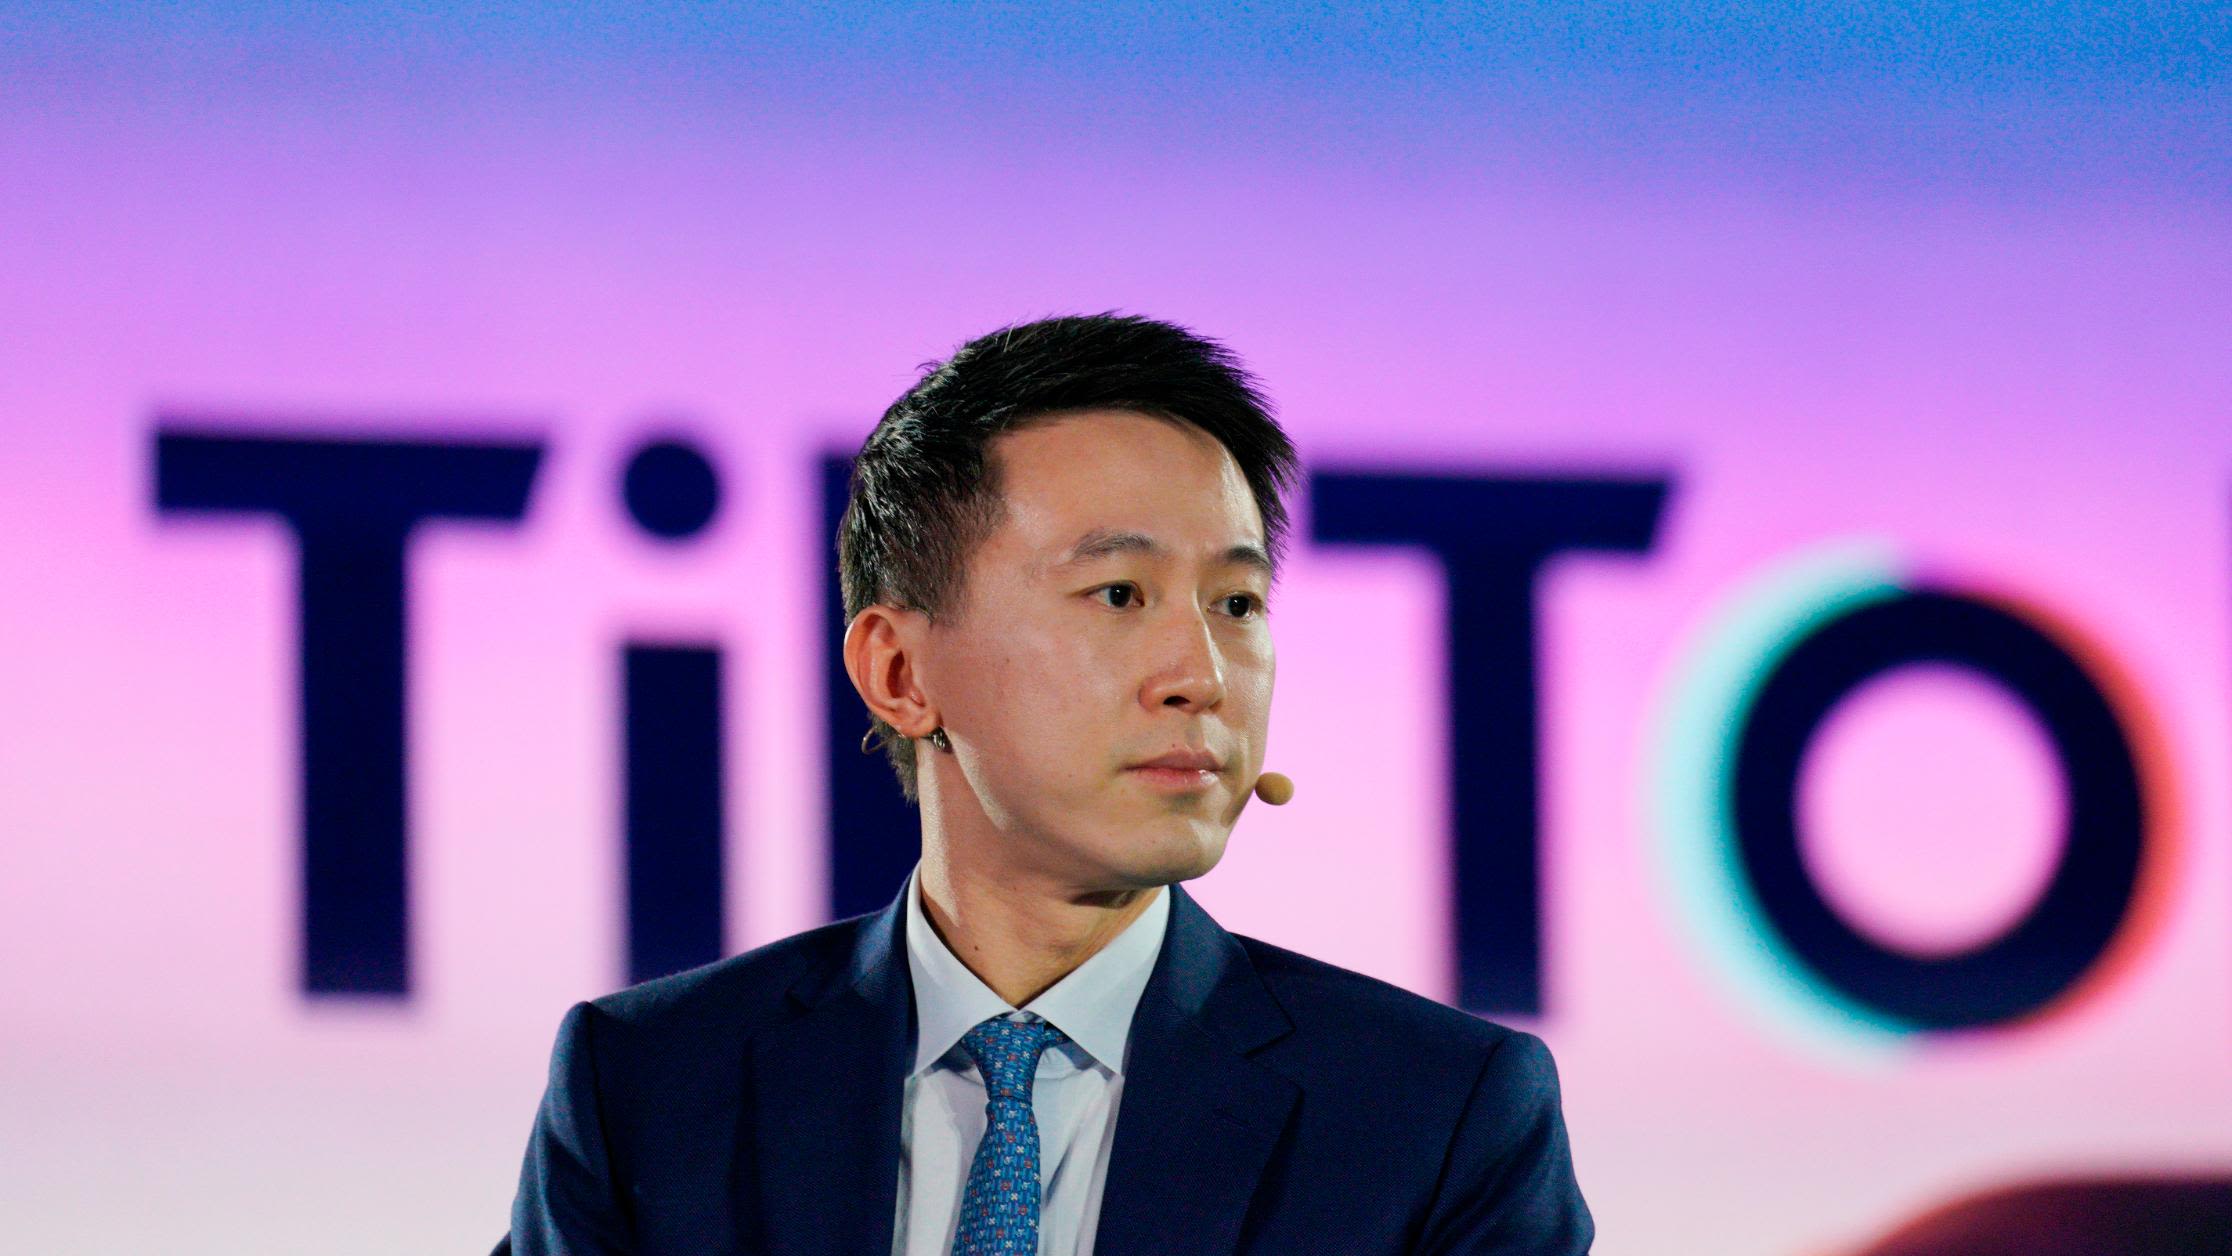 Who is Shou Zi Chew? Mounting scrutiny on TikTok could put new spotlight on its CEO | CNN Business